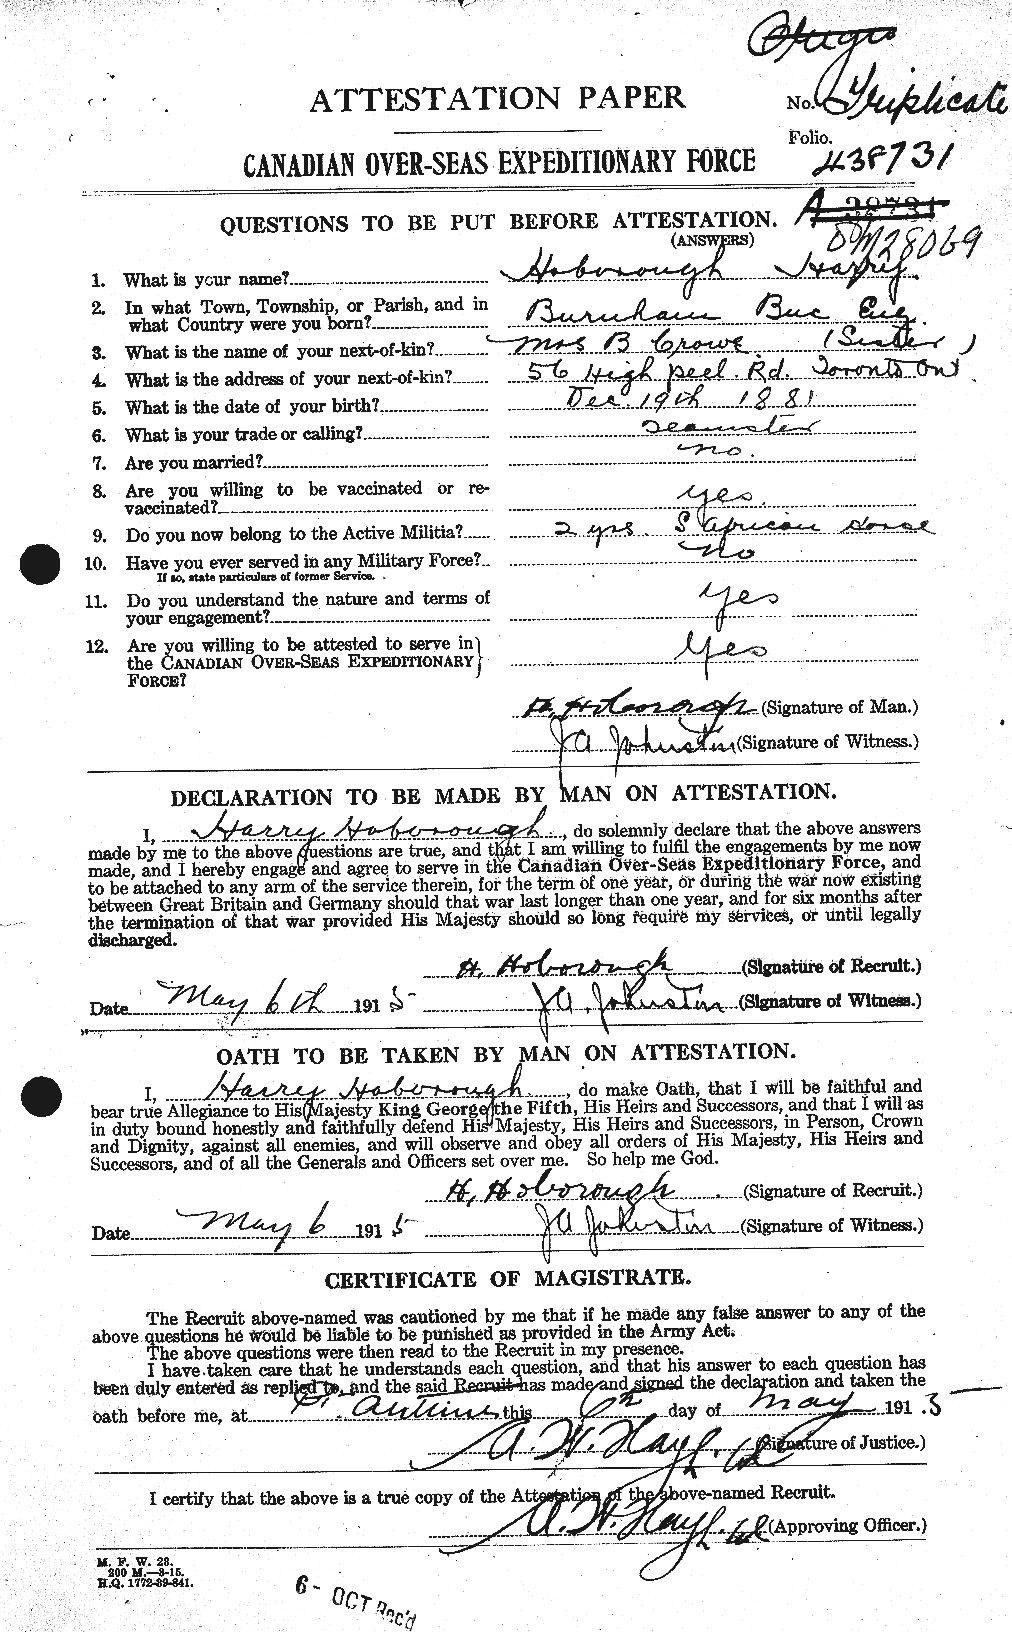 Personnel Records of the First World War - CEF 397573a